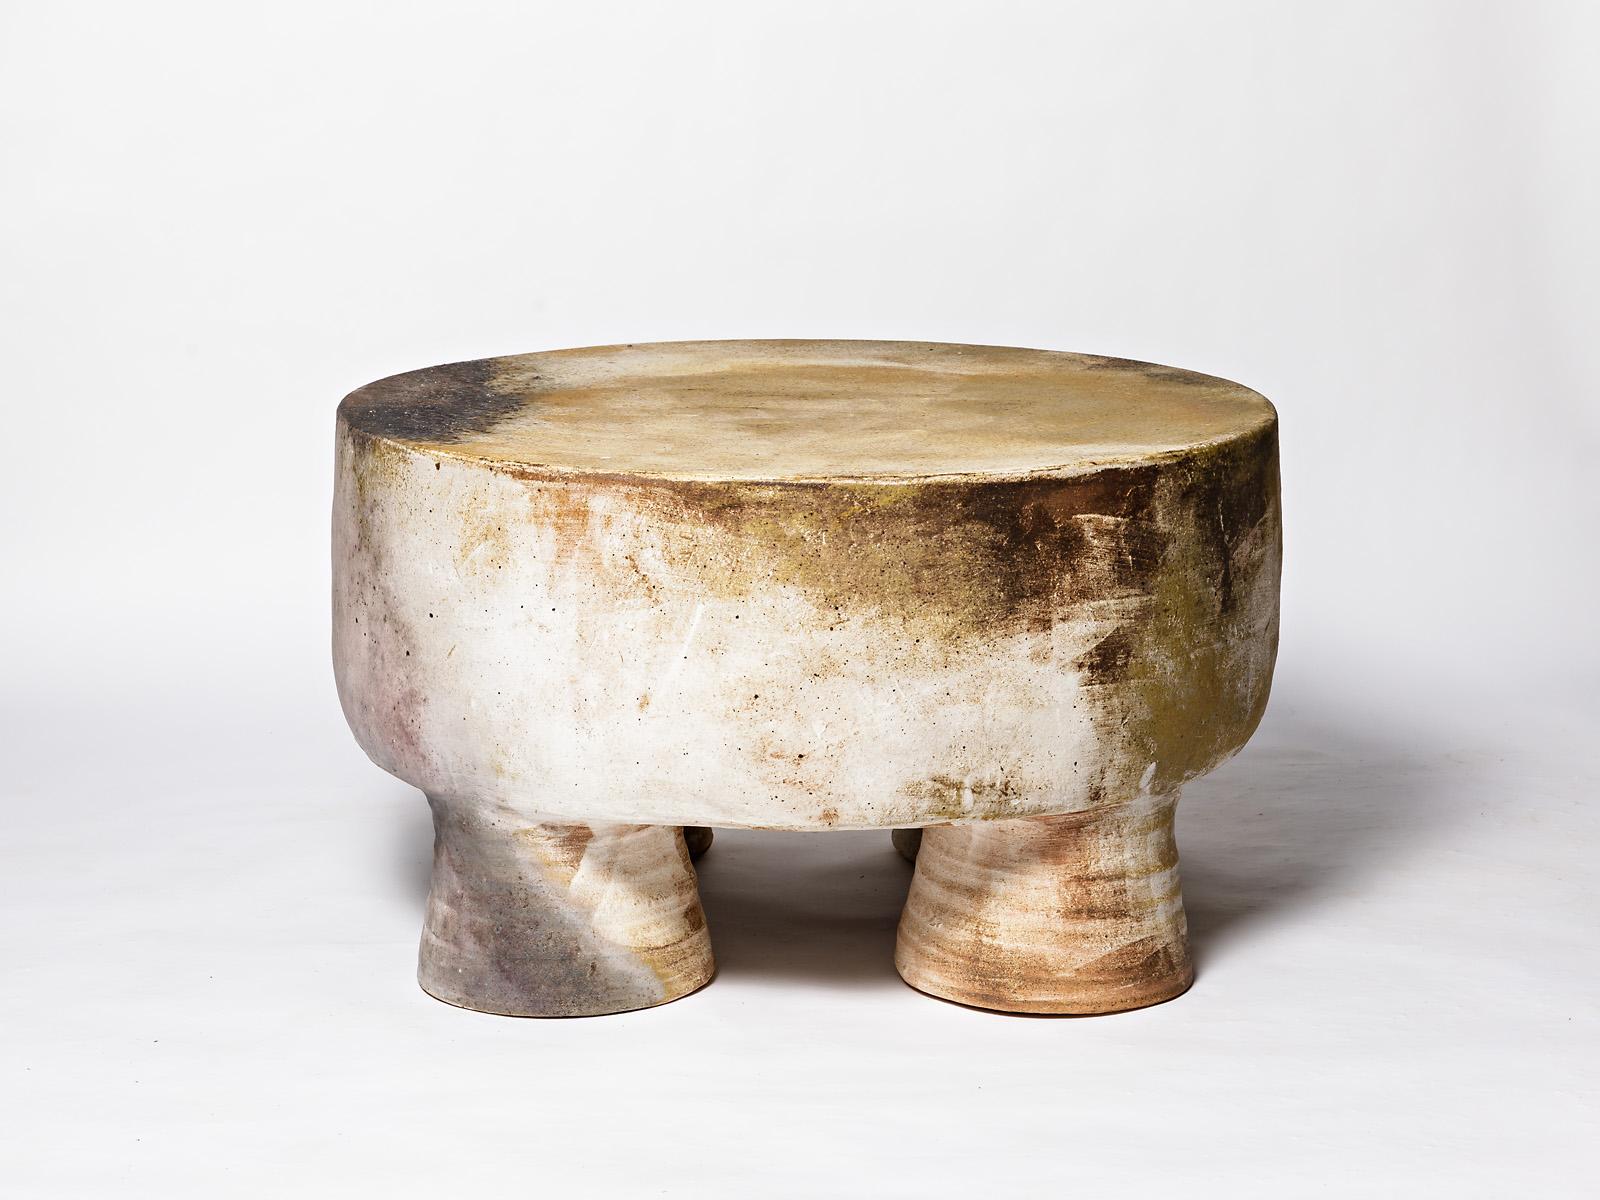 Ceramic Unique and Exceptionnel Coffee Table by Mia Jensen, Wood Firing, 2022